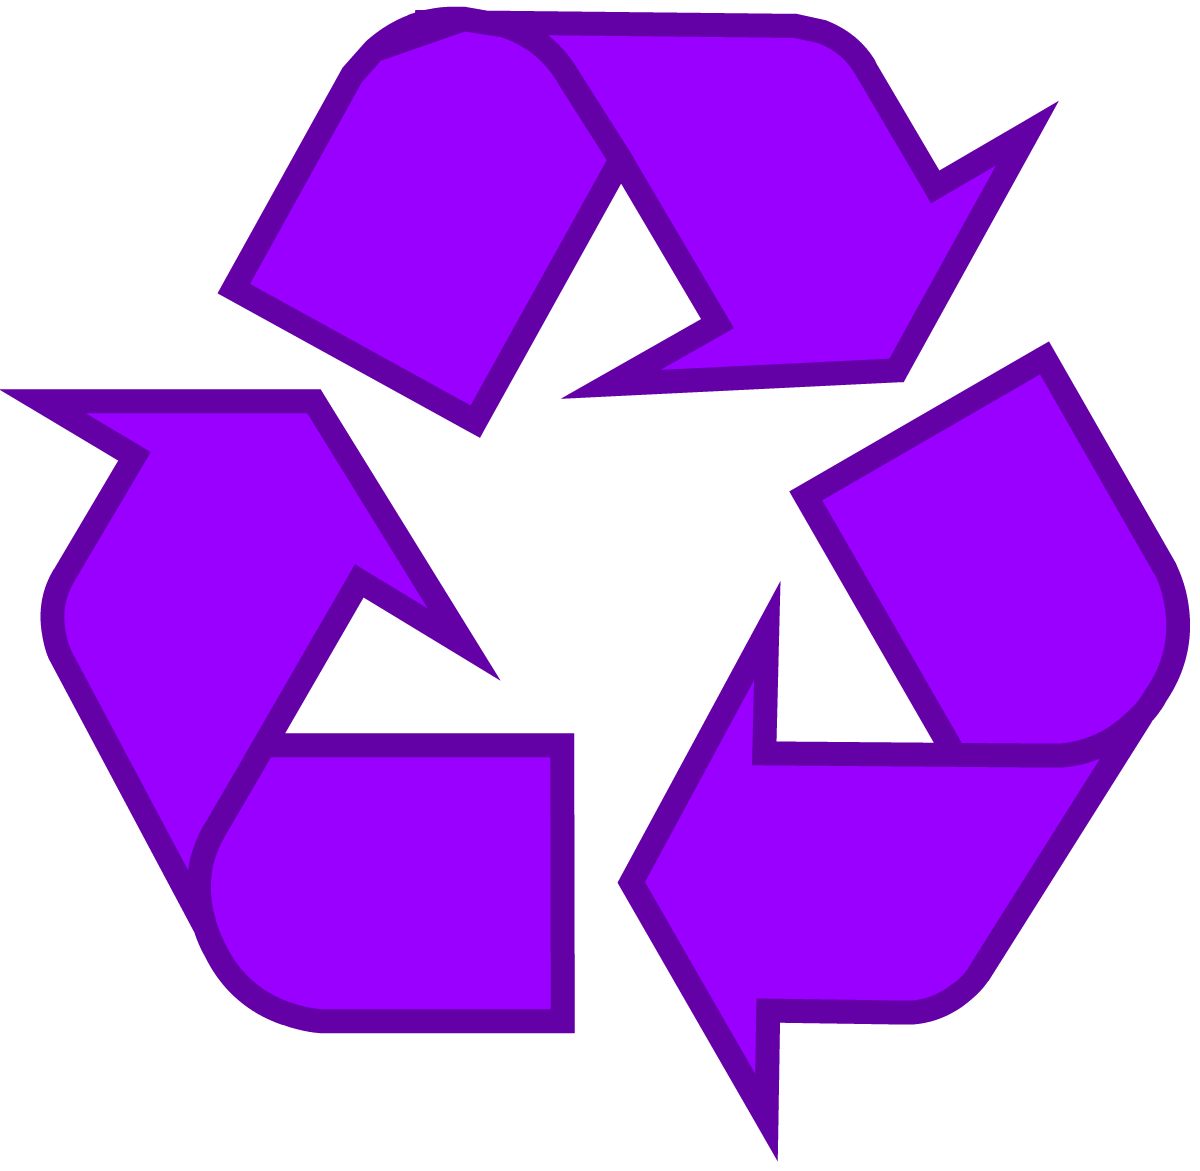 Large Recycle Logo - Recycling Symbol - Download the Original Recycle Logo